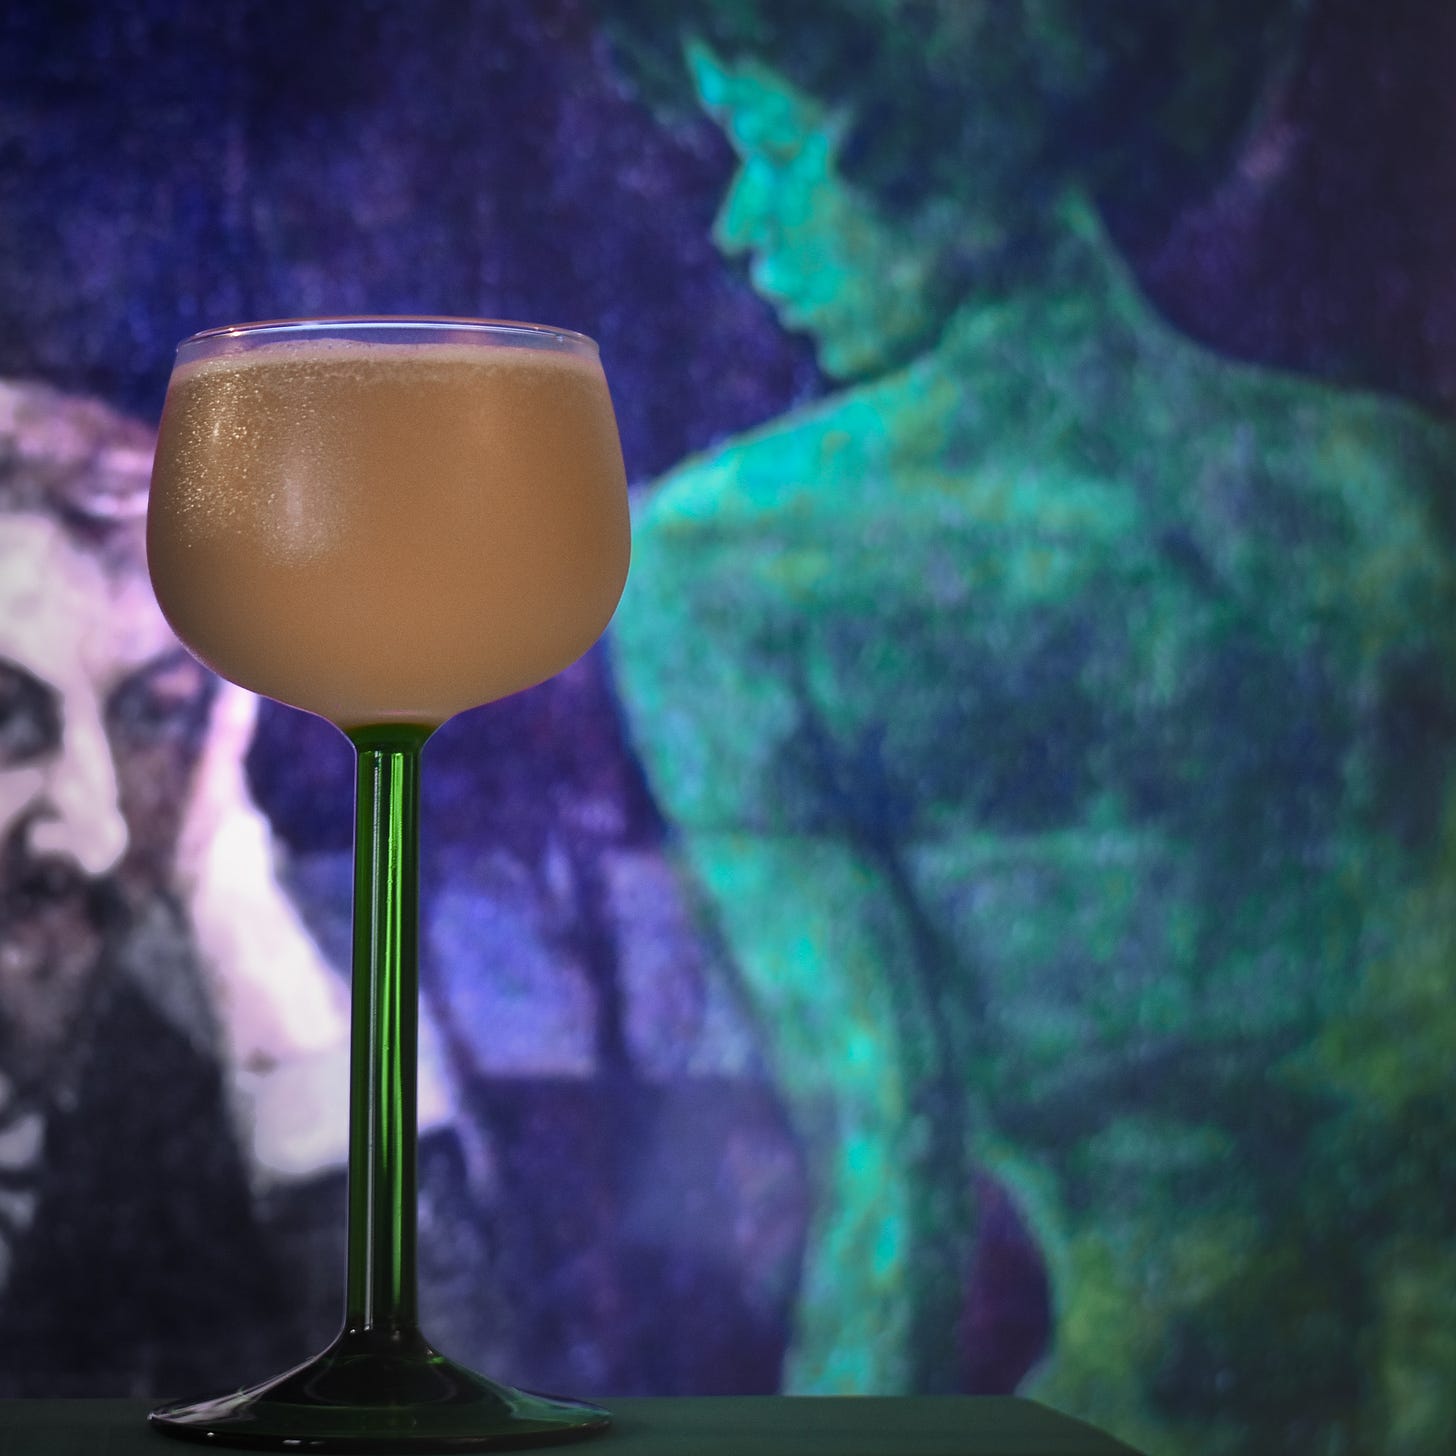 Viktor Oliva’s absinthe drinker and his Green Fairy stare at The Seelie Court cocktail… if only they’d had it back then! 